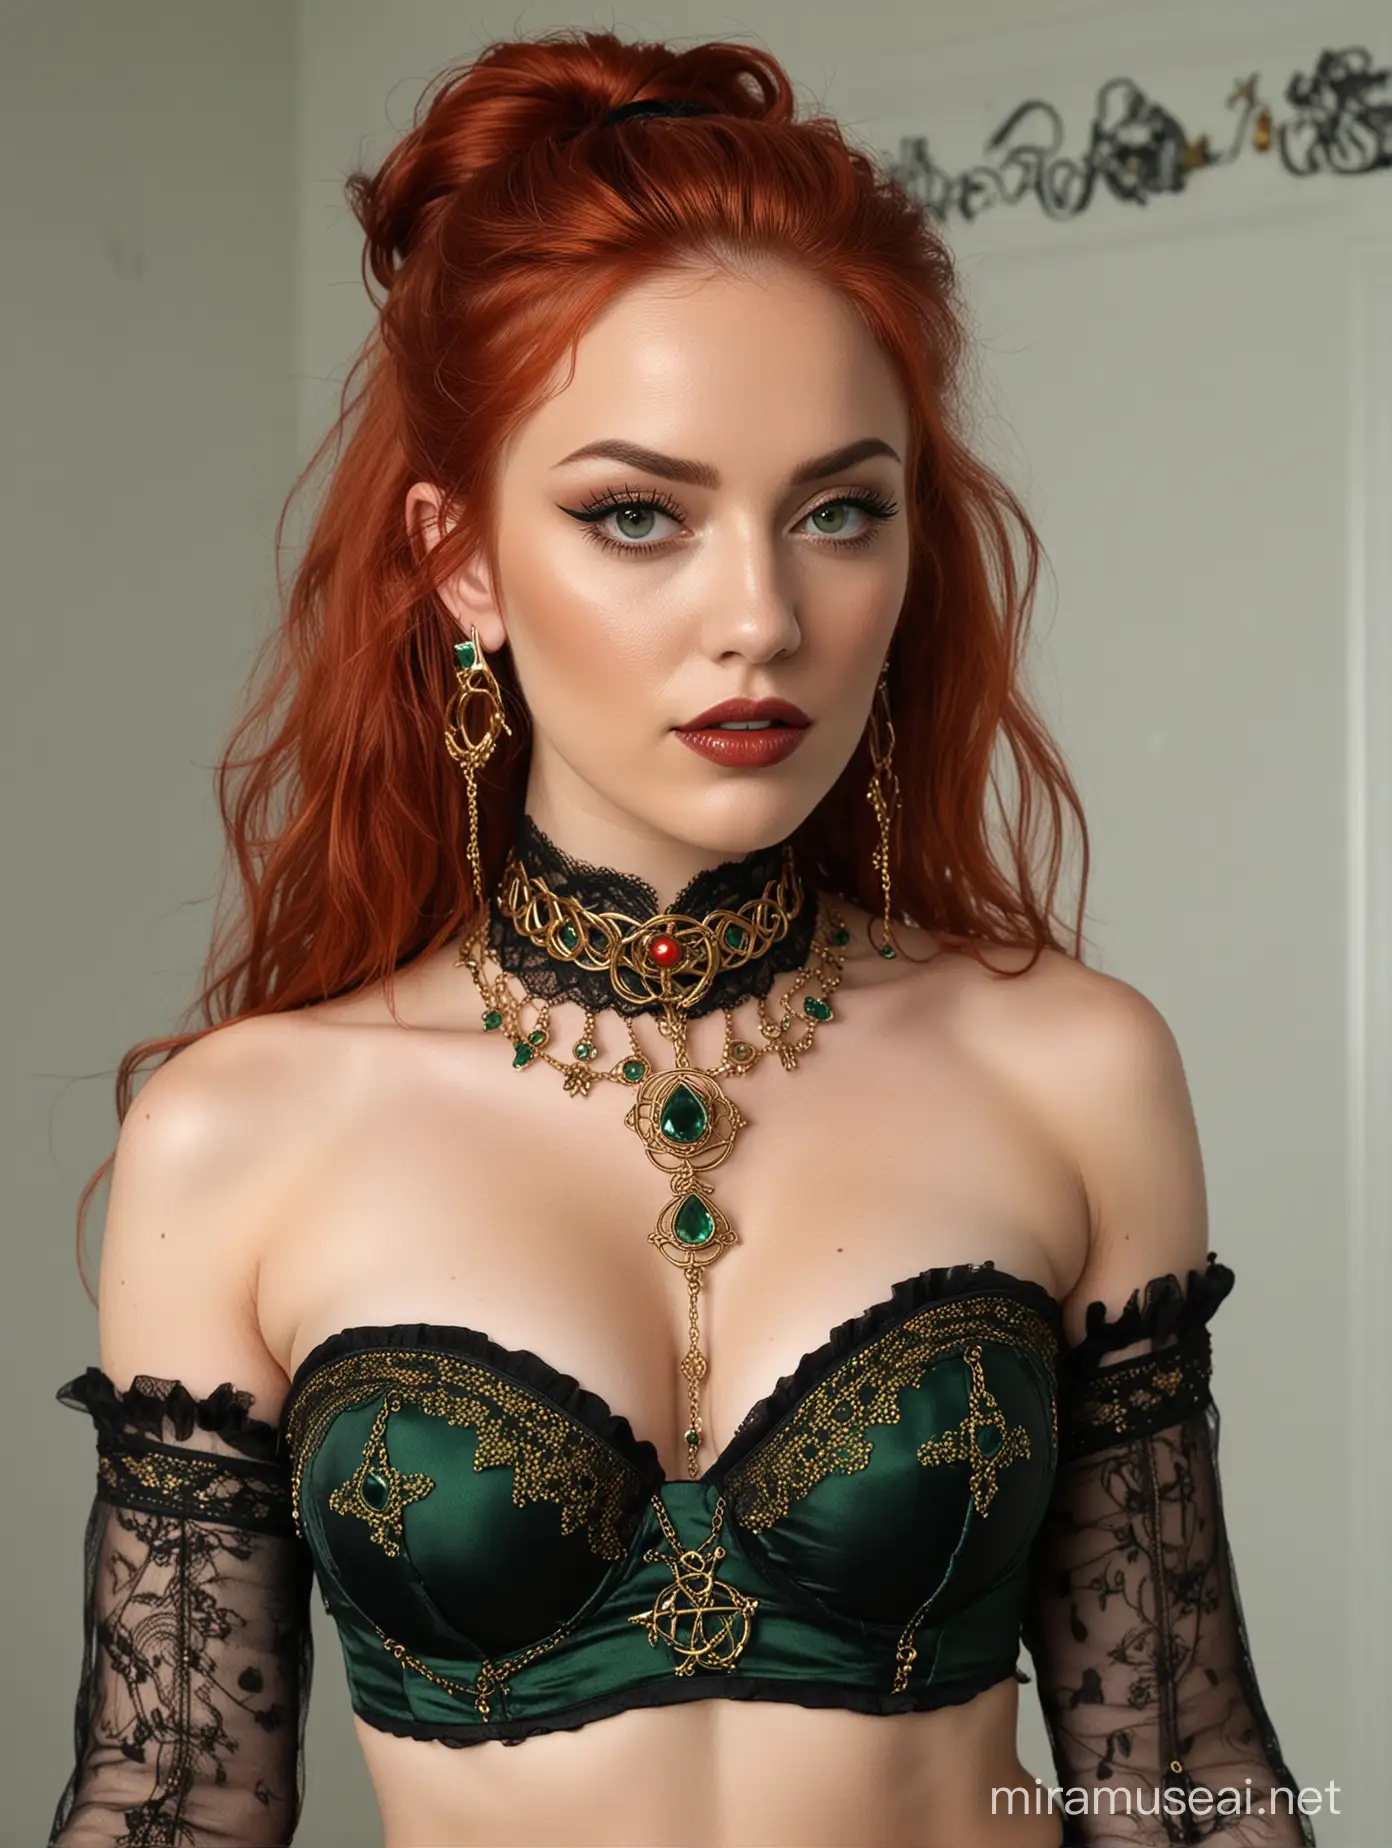 create an ultra realistic full length portrait of a woman with ankle length deep-red hair, she wears a gold Ferronnière coming to a downward pointing Triquetra over her forehead, she wears a gold choker set with emeralds around her neck, she has seven gold rings in the upper cartilage of each ear, she wears gold celtic knot earrings set with emeralds from each ear lobe, she wears a vivid green lace waspie style corset embroidered with black celtic dragons, she wears a vivid green garter belt attached to black fishnet stockings, she has a gold chain and emerald belly button piercing, she wears a gold belly chain set with seven small emeralds, she wears black fingerless armlength lace gloves, she has vertical clitorl hood piercing made of red gold and set with a plack pearl, she does not wear panties, her genitals are nude, her buttocks are nude, she wear black velvet spike high heeled shoes, her uncovered nipples are pierced with black rings set with pigeon blood red spinel spheres, she has light green eye shadow, she has delicate blush makeup, shas blood red glossy lipstick, she stands on a white marble floor in a palatial bedroom